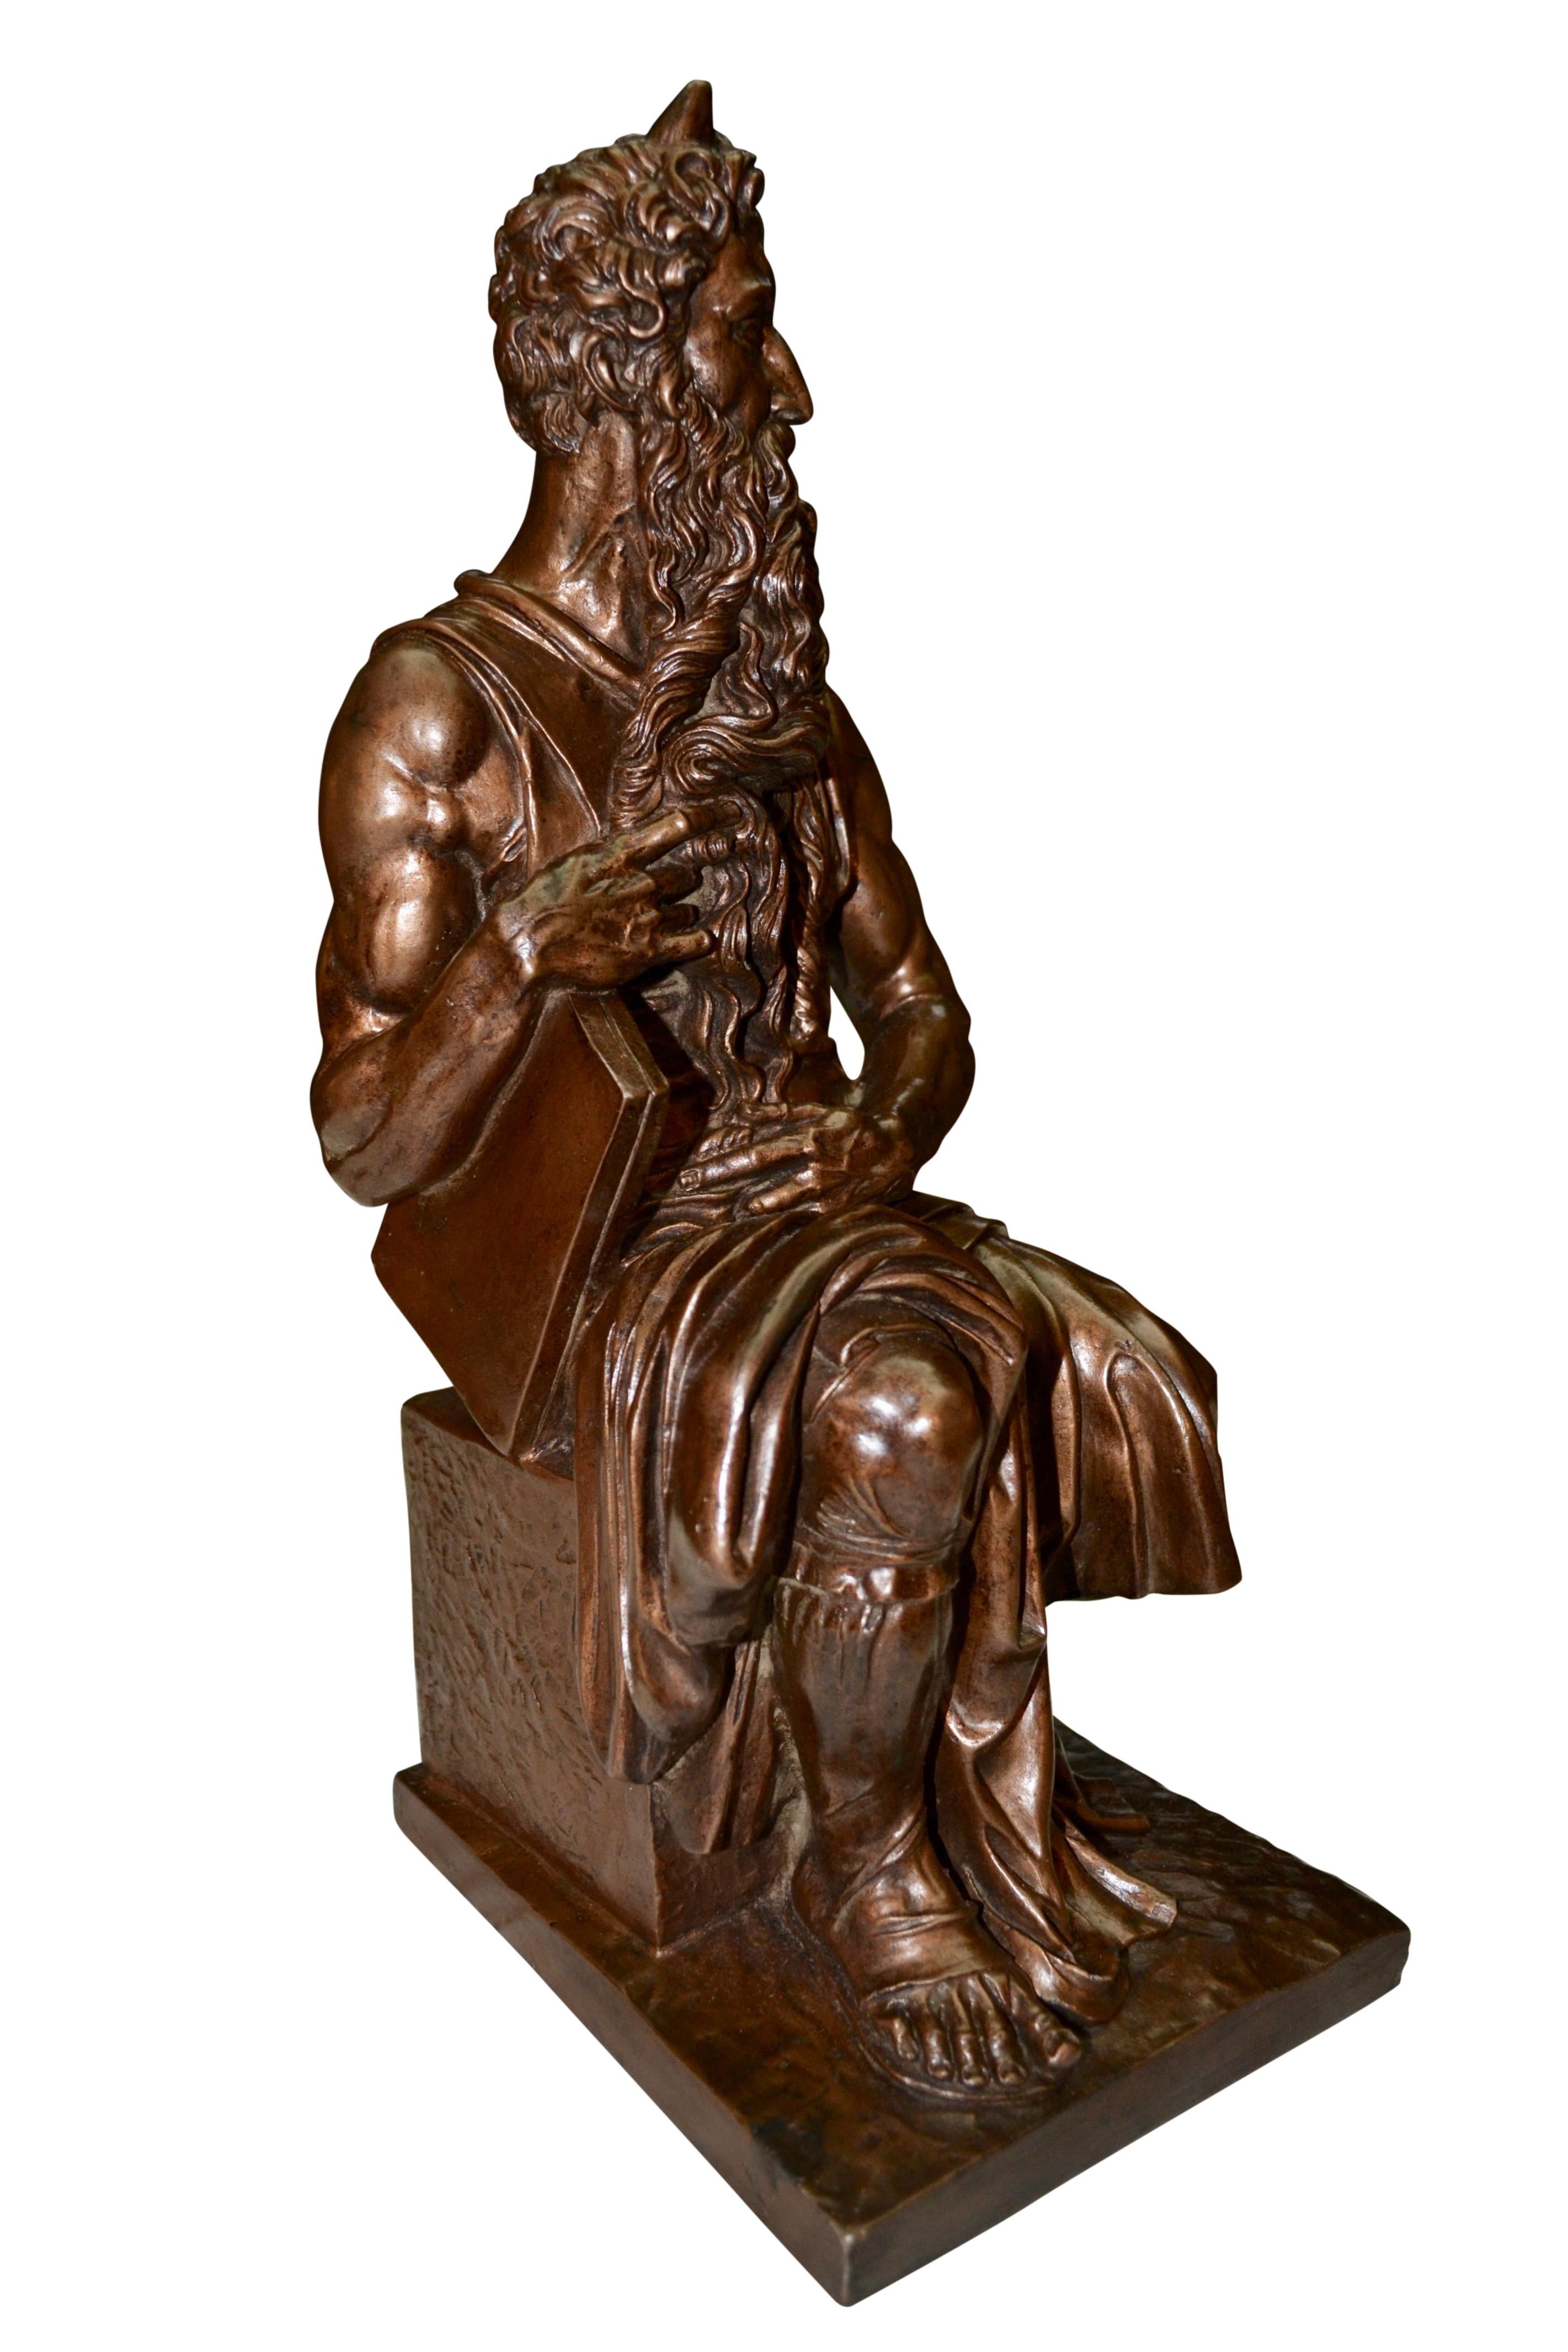 An exceptionally well executed bronzed terracotta copy of seated Moses holding the Commandment tablet, a hugely famous sculpture by the Italian High Renaissance artist Michelangelo. The marble original is housed in the church of San Pietro in